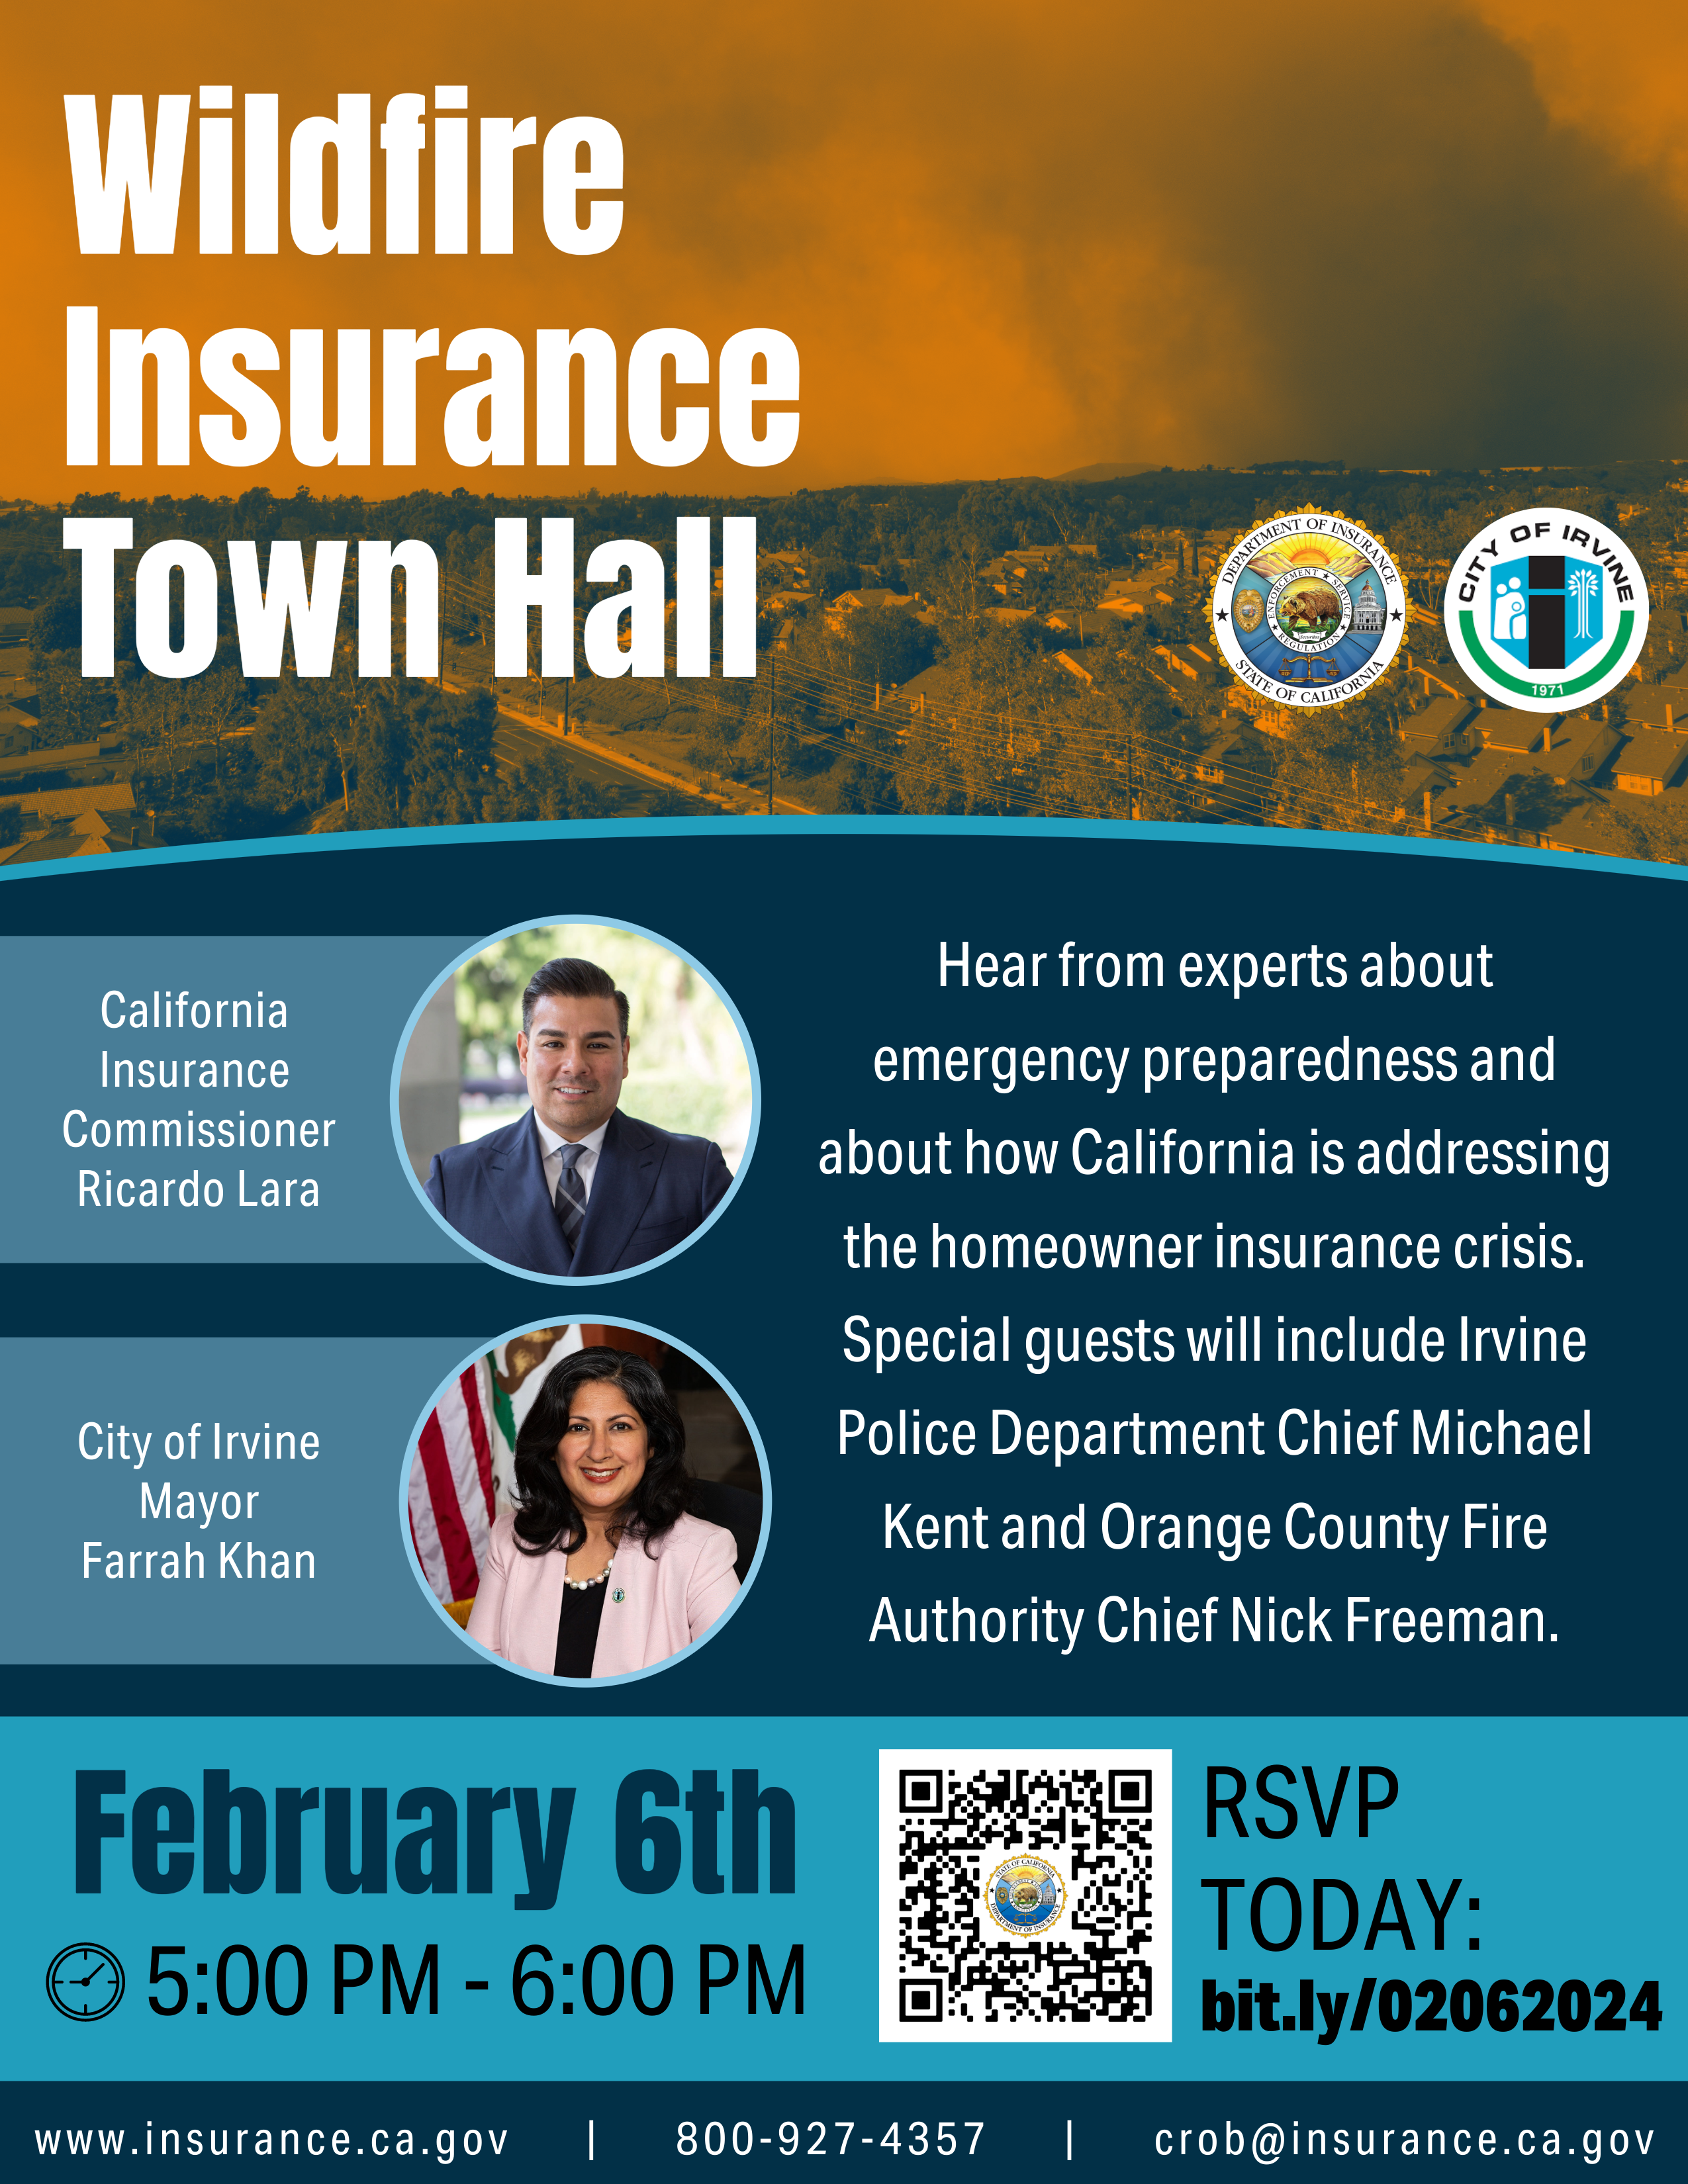 Hear from experts about emergency preparedness and about how California is addressing the homeowner insurance crisis. Special guests will include Irvine Police Department Chief Michael Kent and Orange County Fire Authority Chief Nick Freeman.